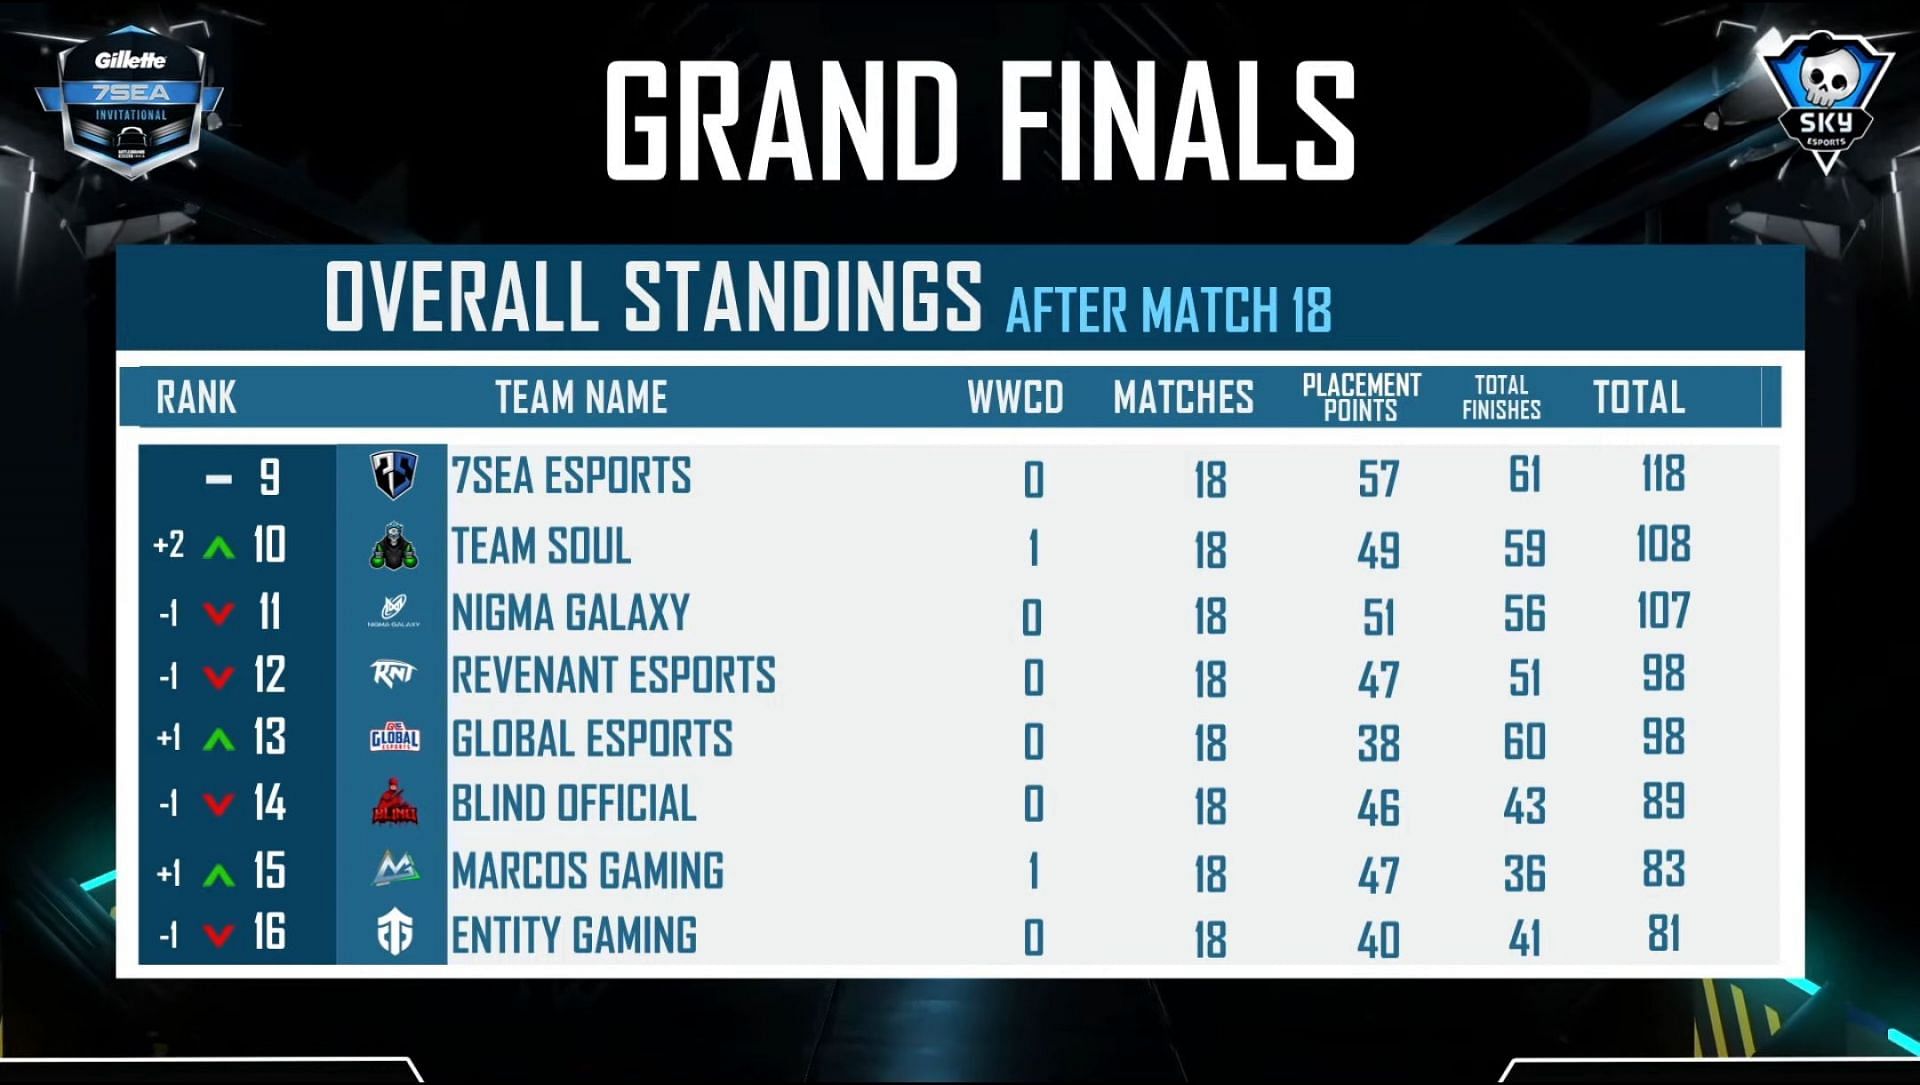 Team Soul secured 11th place (Image via Skyesports)